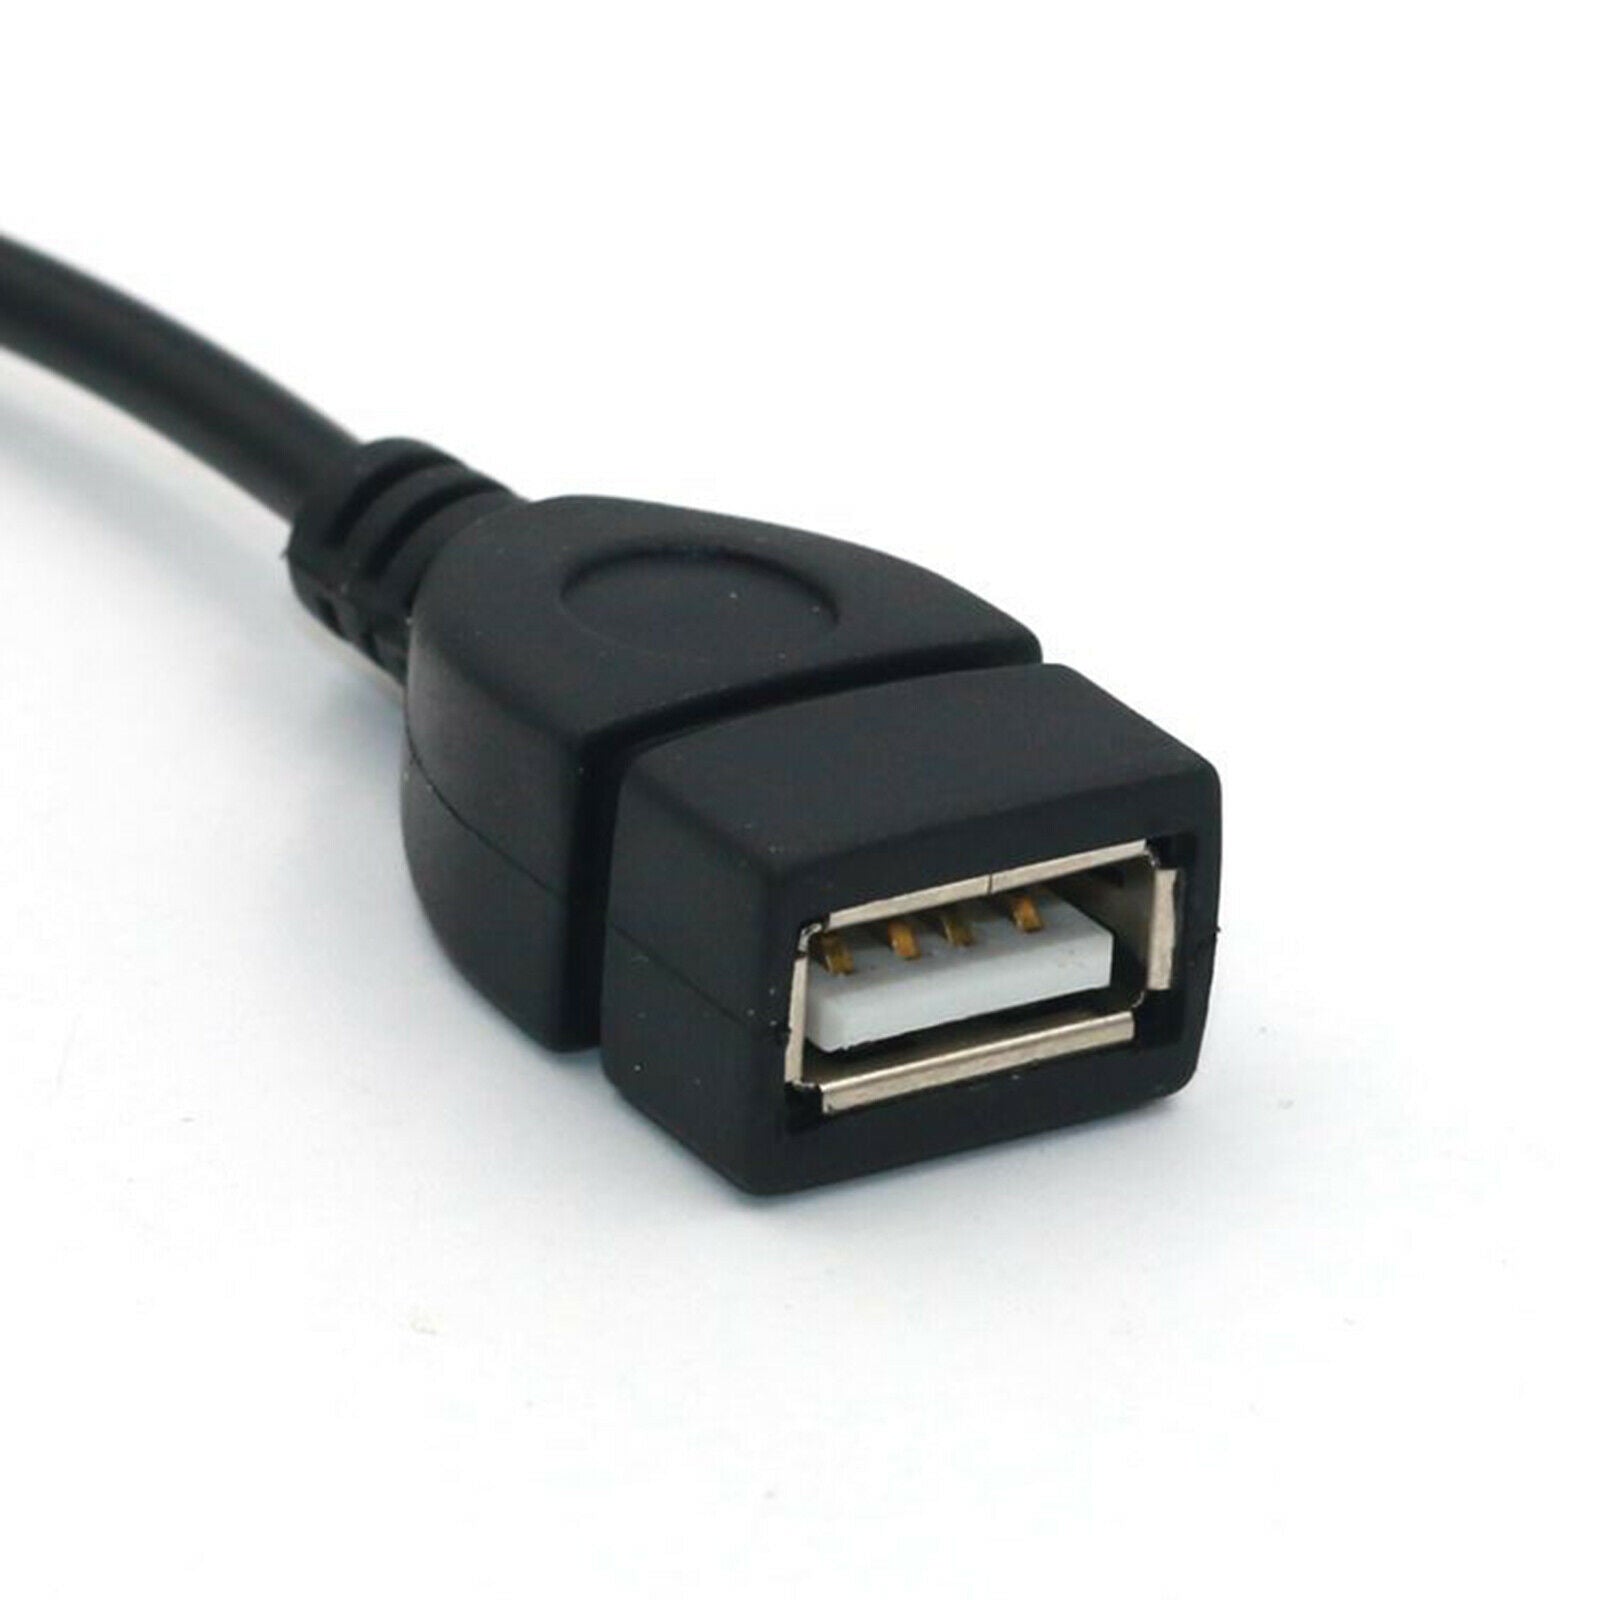 20cm 7.9" 3.5mm Male Audio AUX to USB Female Converter Adapter Cable Cord